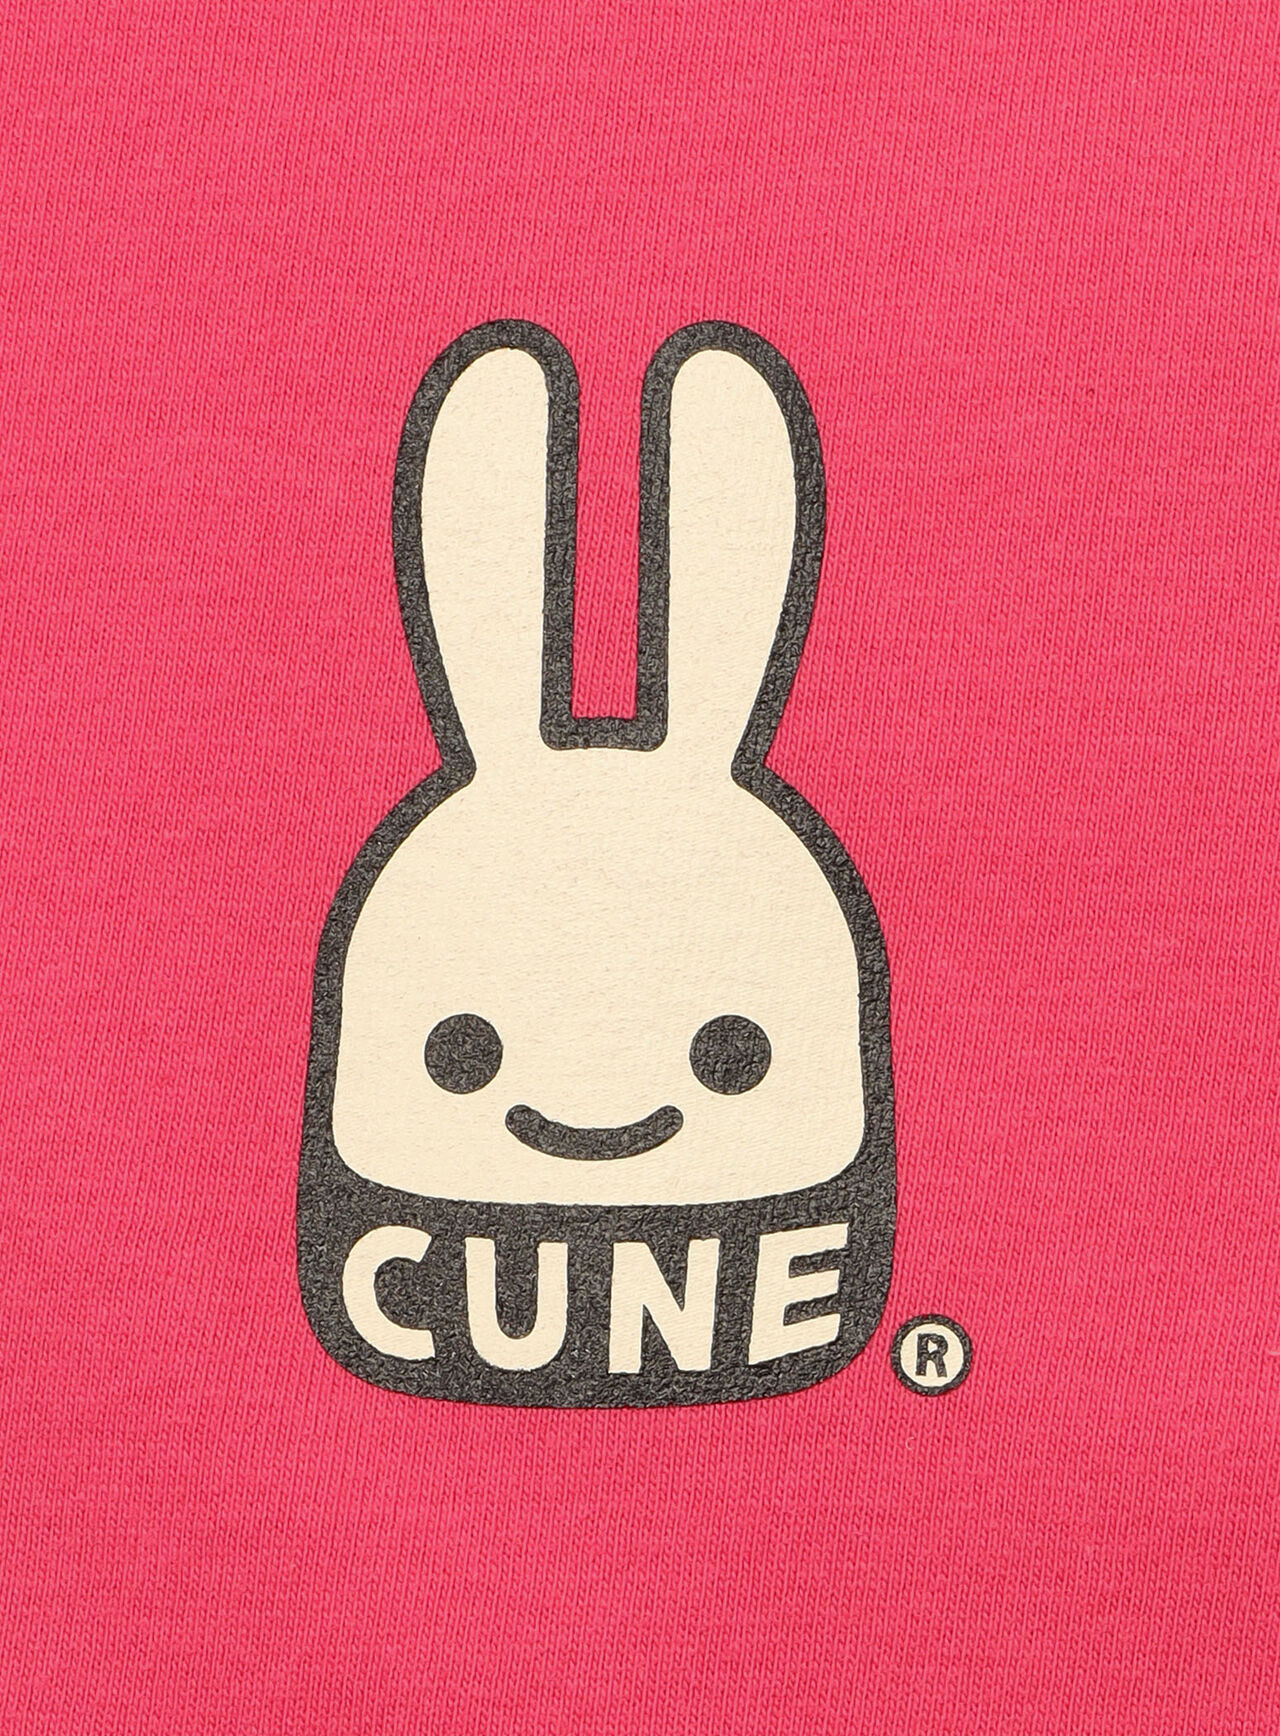 S/S Tee CUNE Rabbit,L, large image number 4